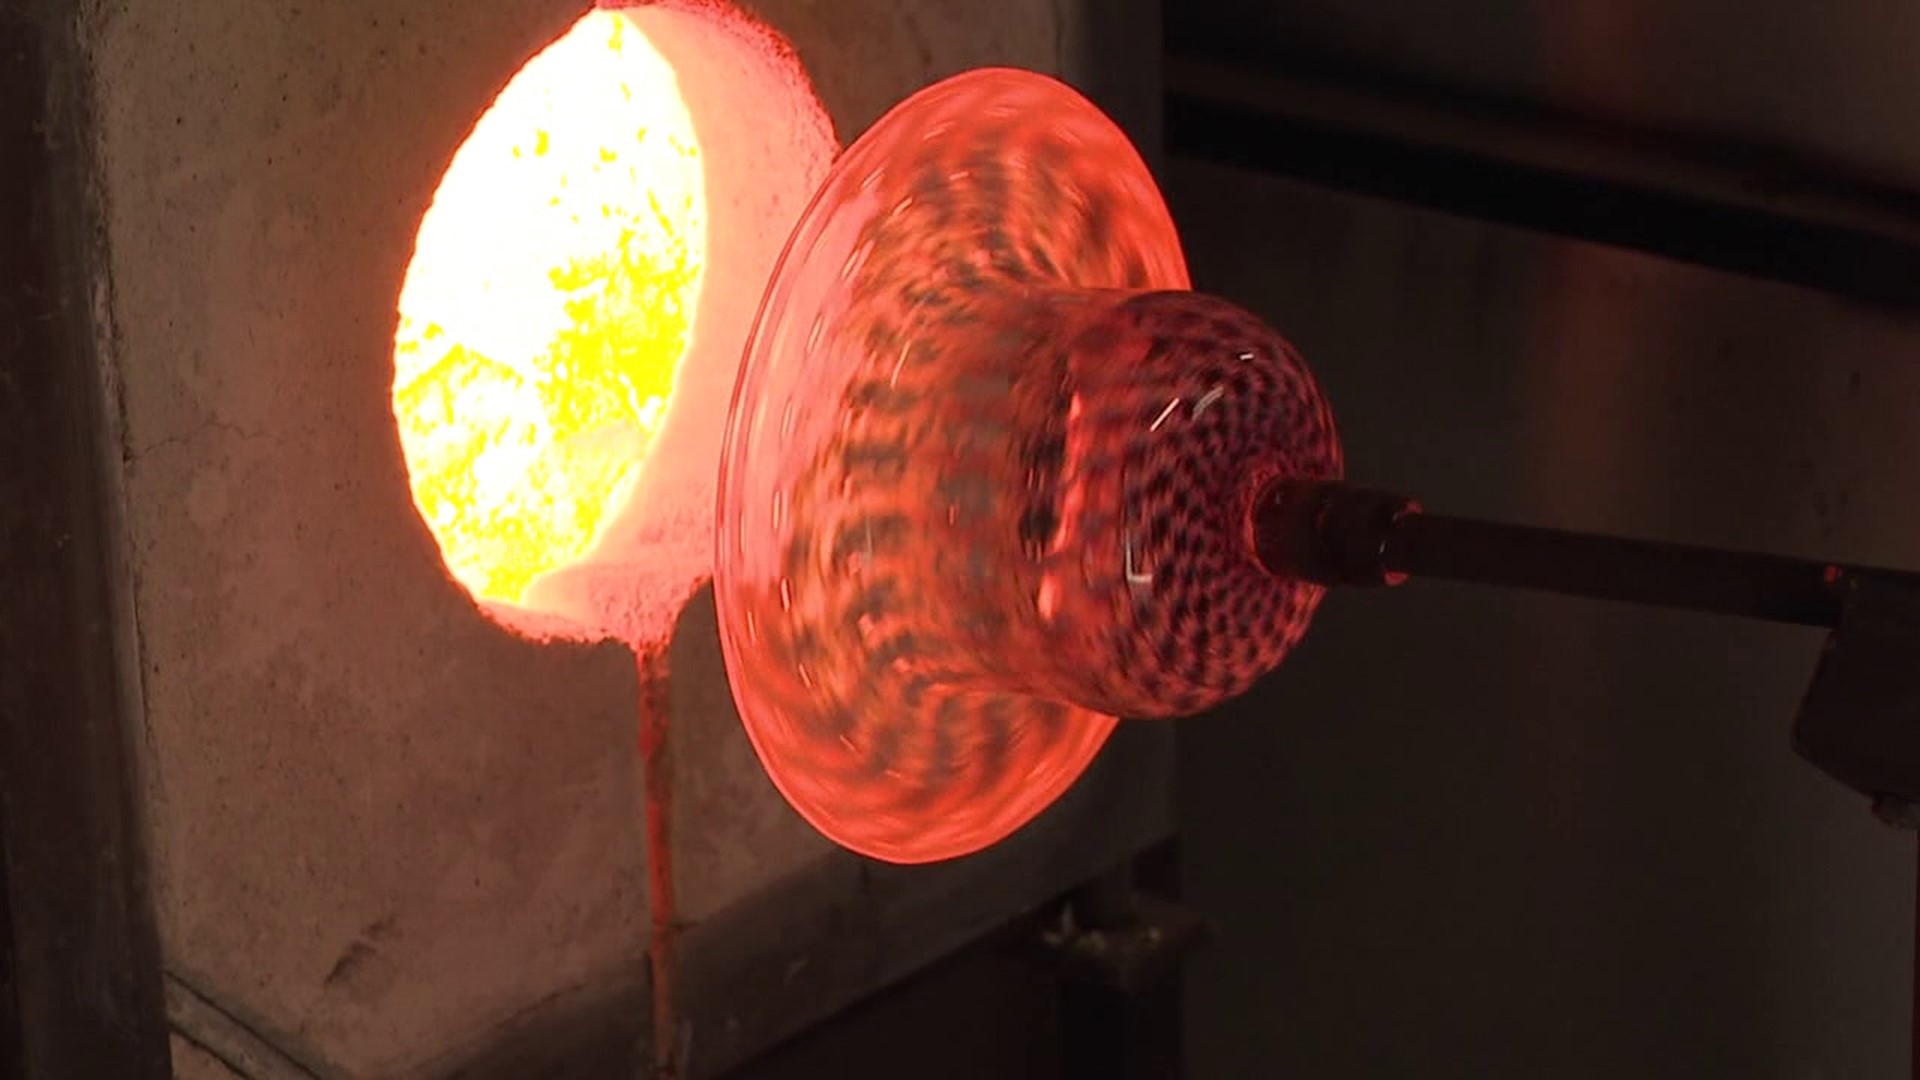 Newswatch 16 went to the Wilbur E. Meyers Glass Studio at Keystone College to check it out.